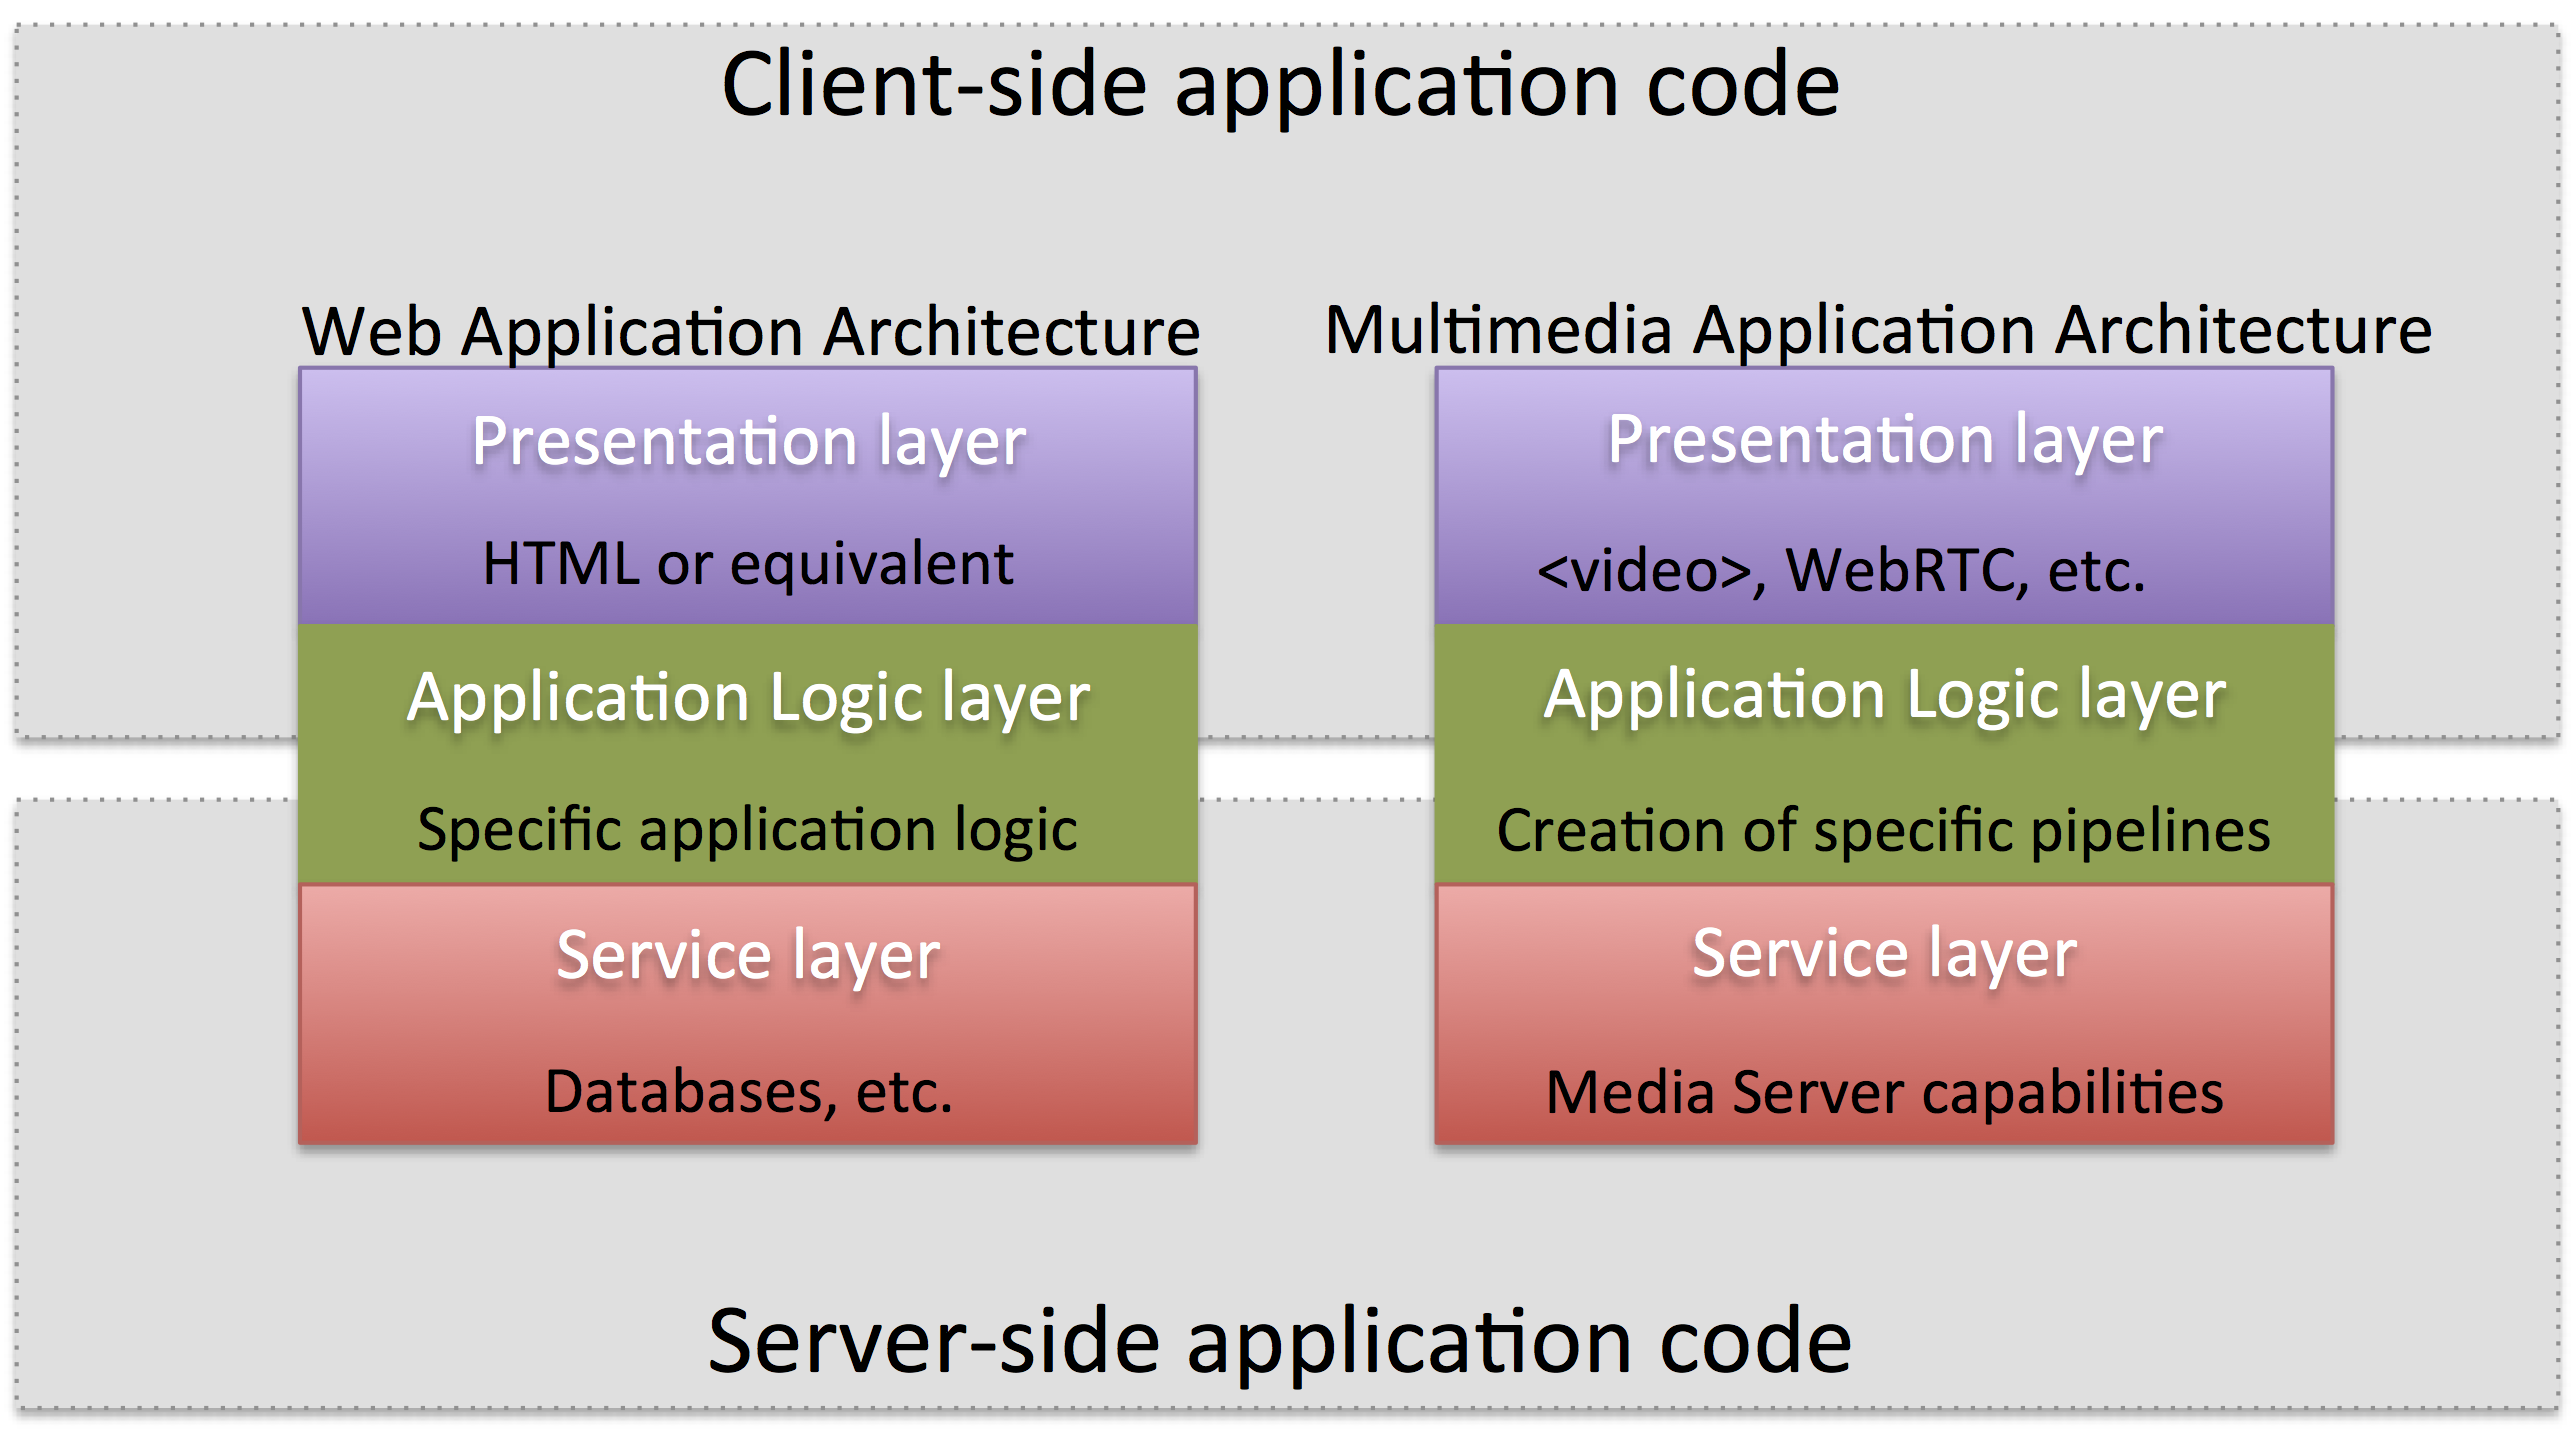 Layered architecture of web and multimedia applications